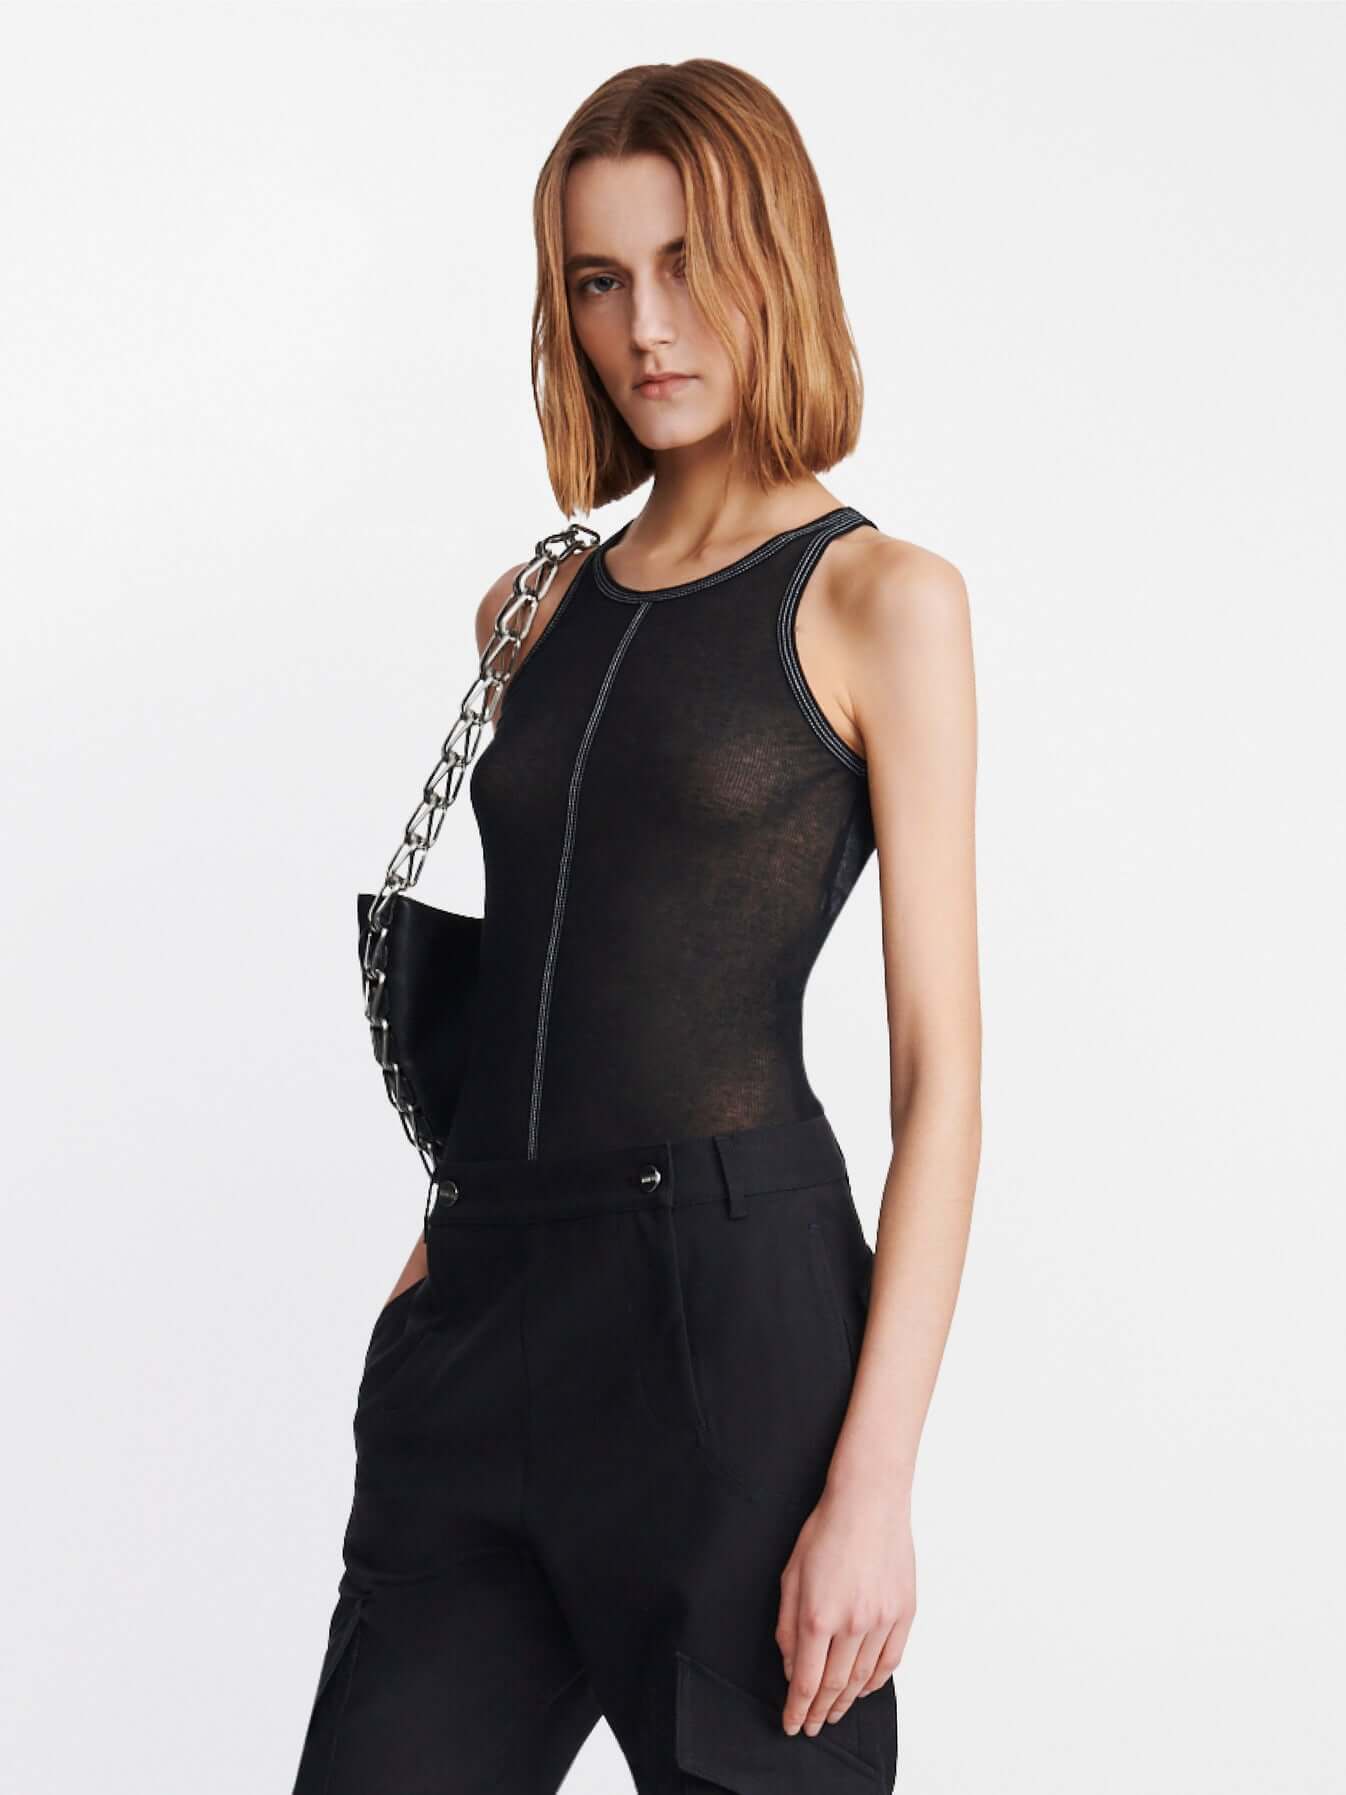 Dion Lee Triple Stitch Tank in Black available at TNT The New Trend Australia.